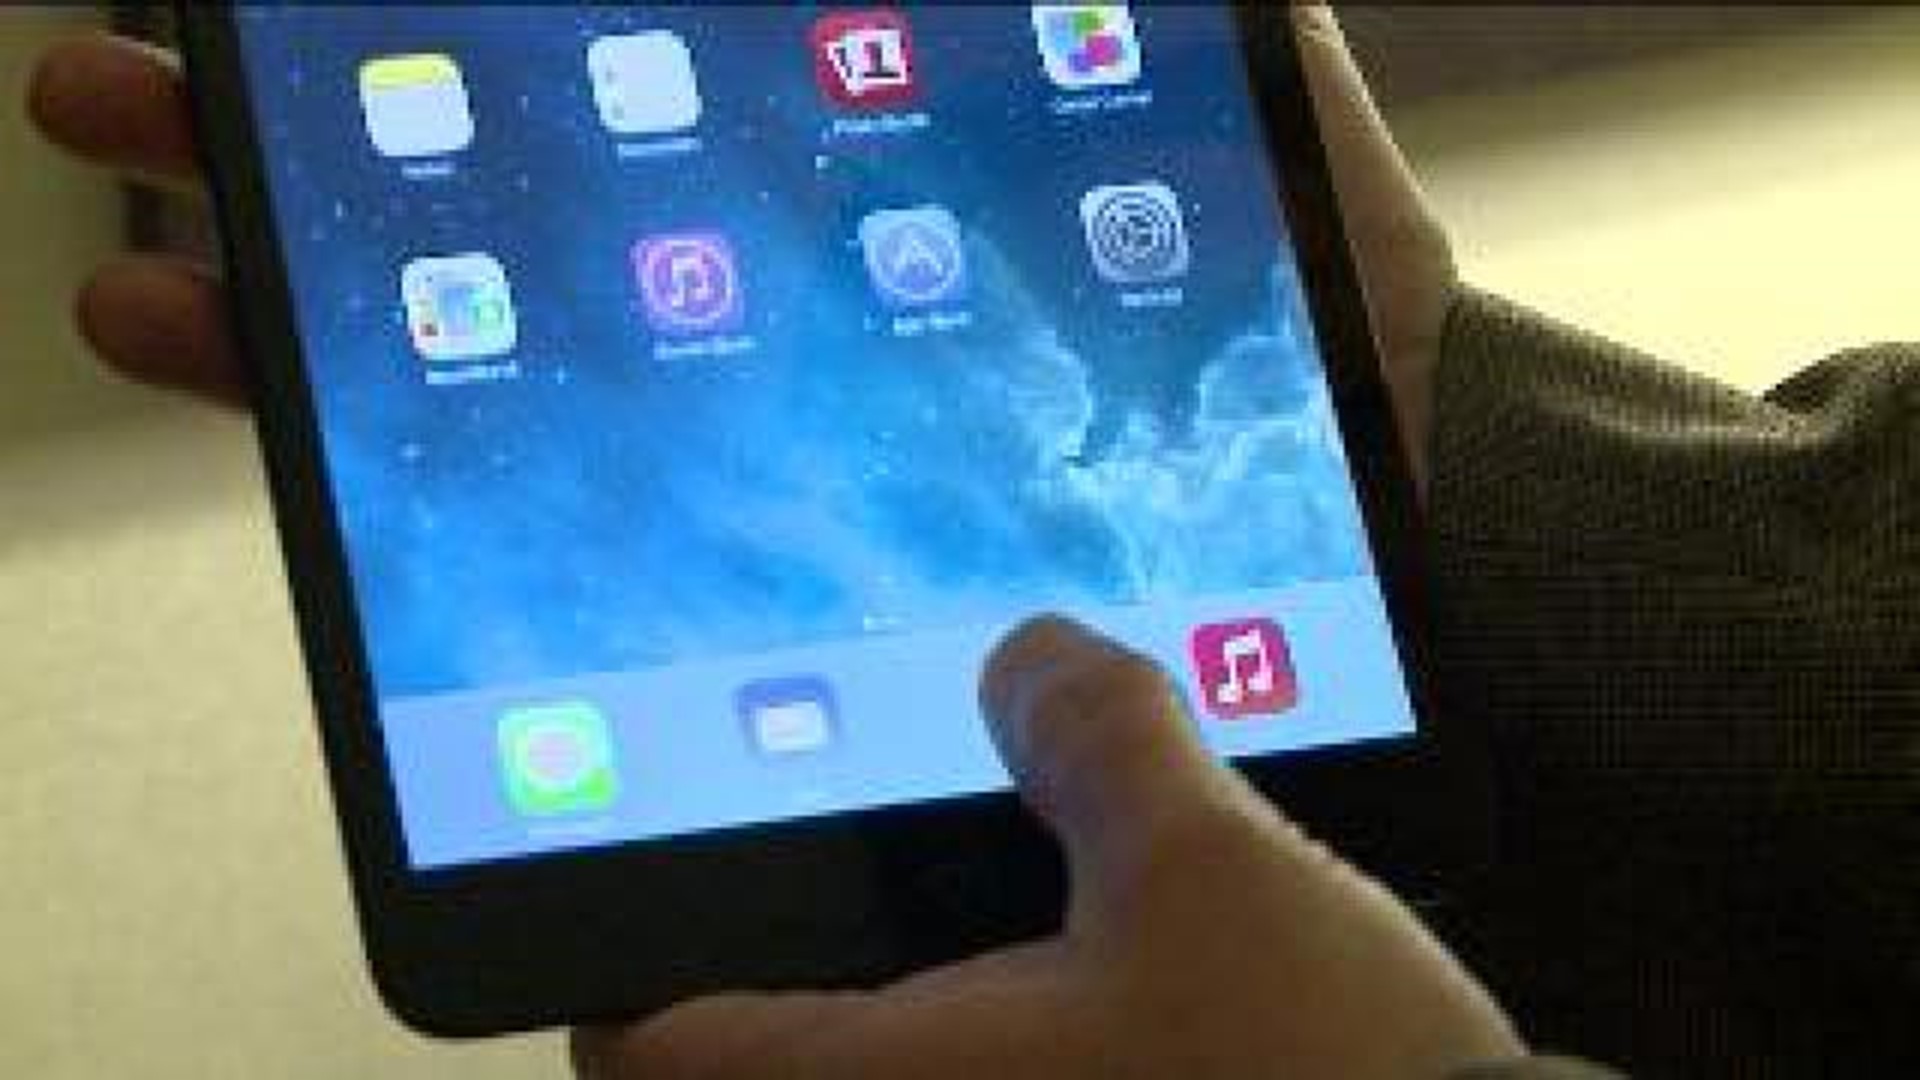 New Hotel Features Technology, Accessories